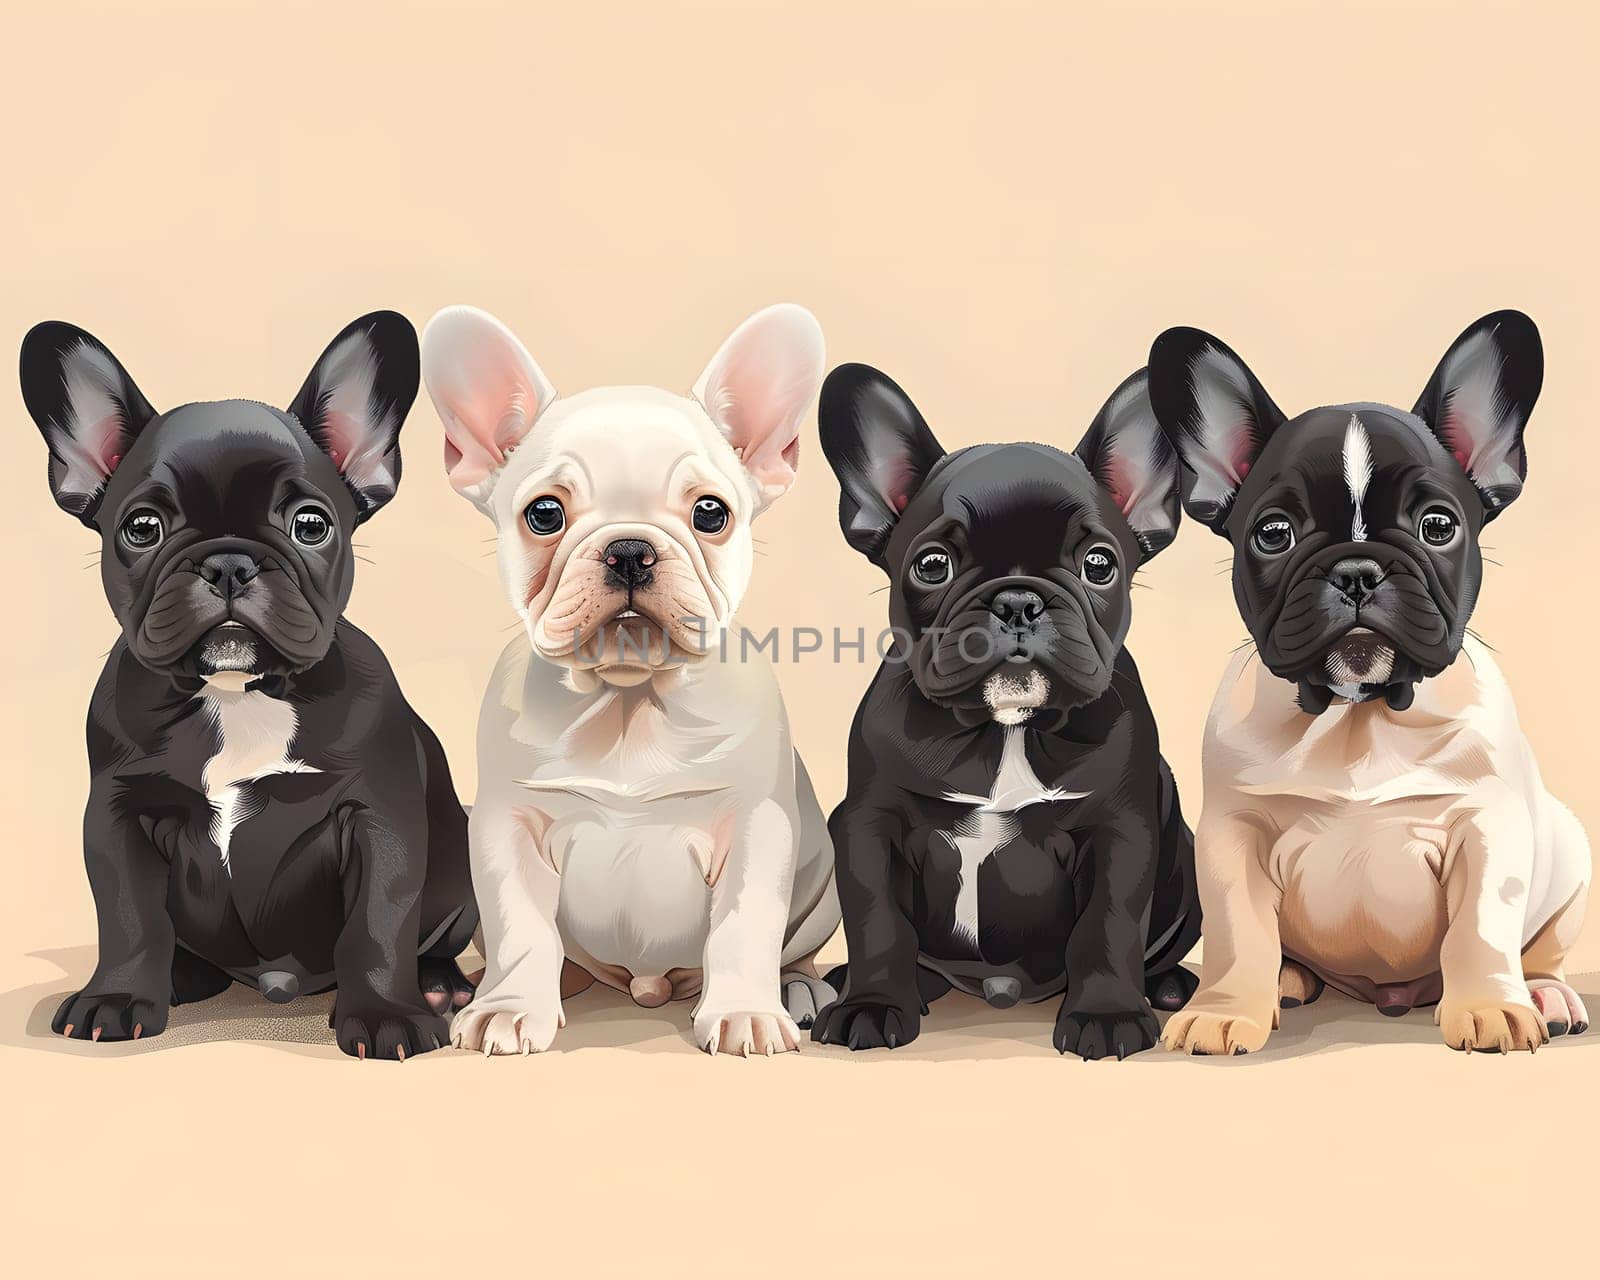 Four French Bulldogs, a small dog breed known for their distinctive batlike ears and fawn coloring, are sitting next to each other on a beige background